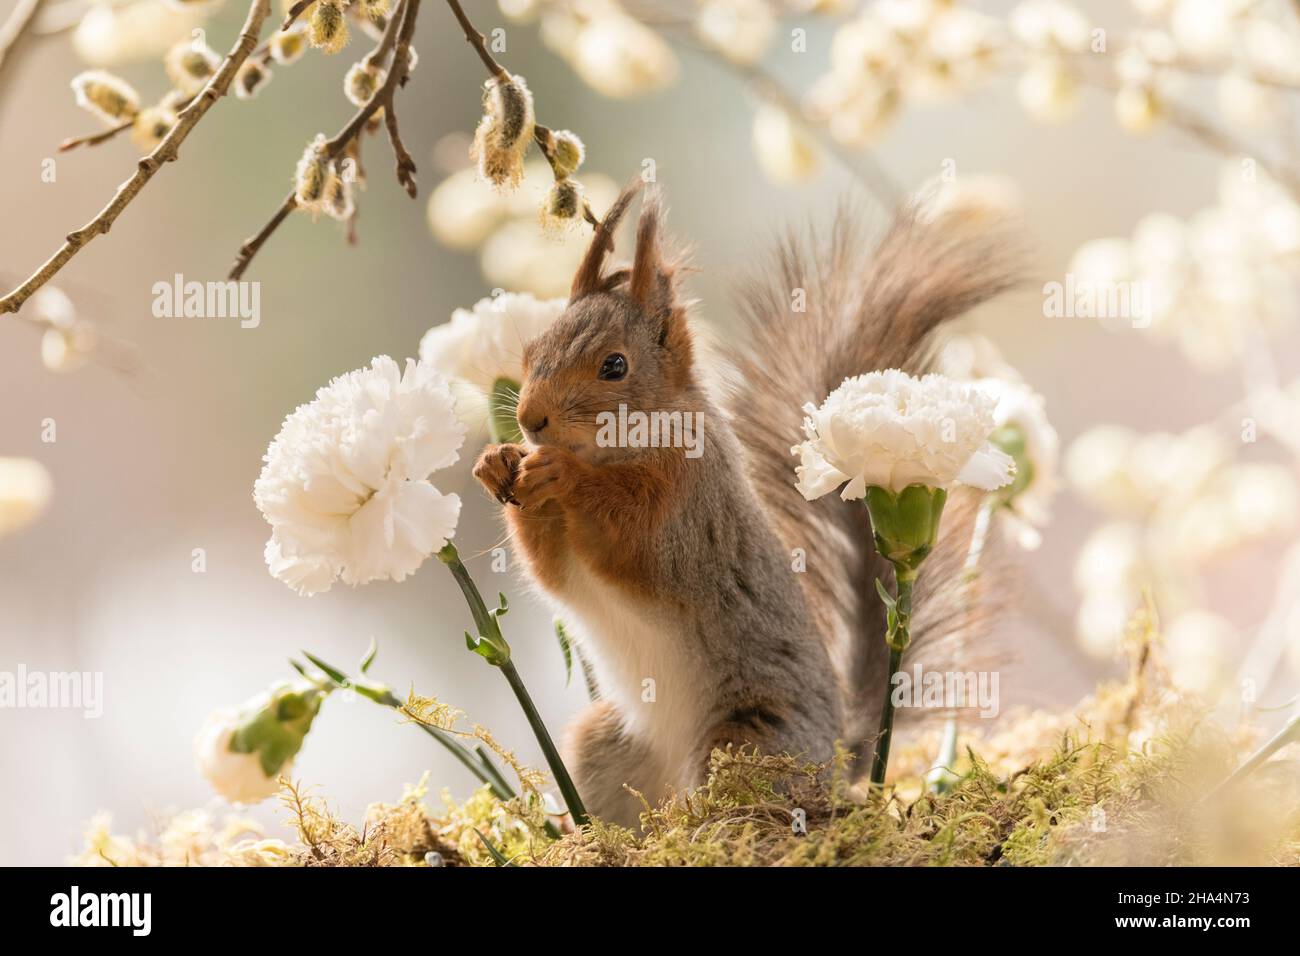 red squirrel holding a white dianthus flower Stock Photo